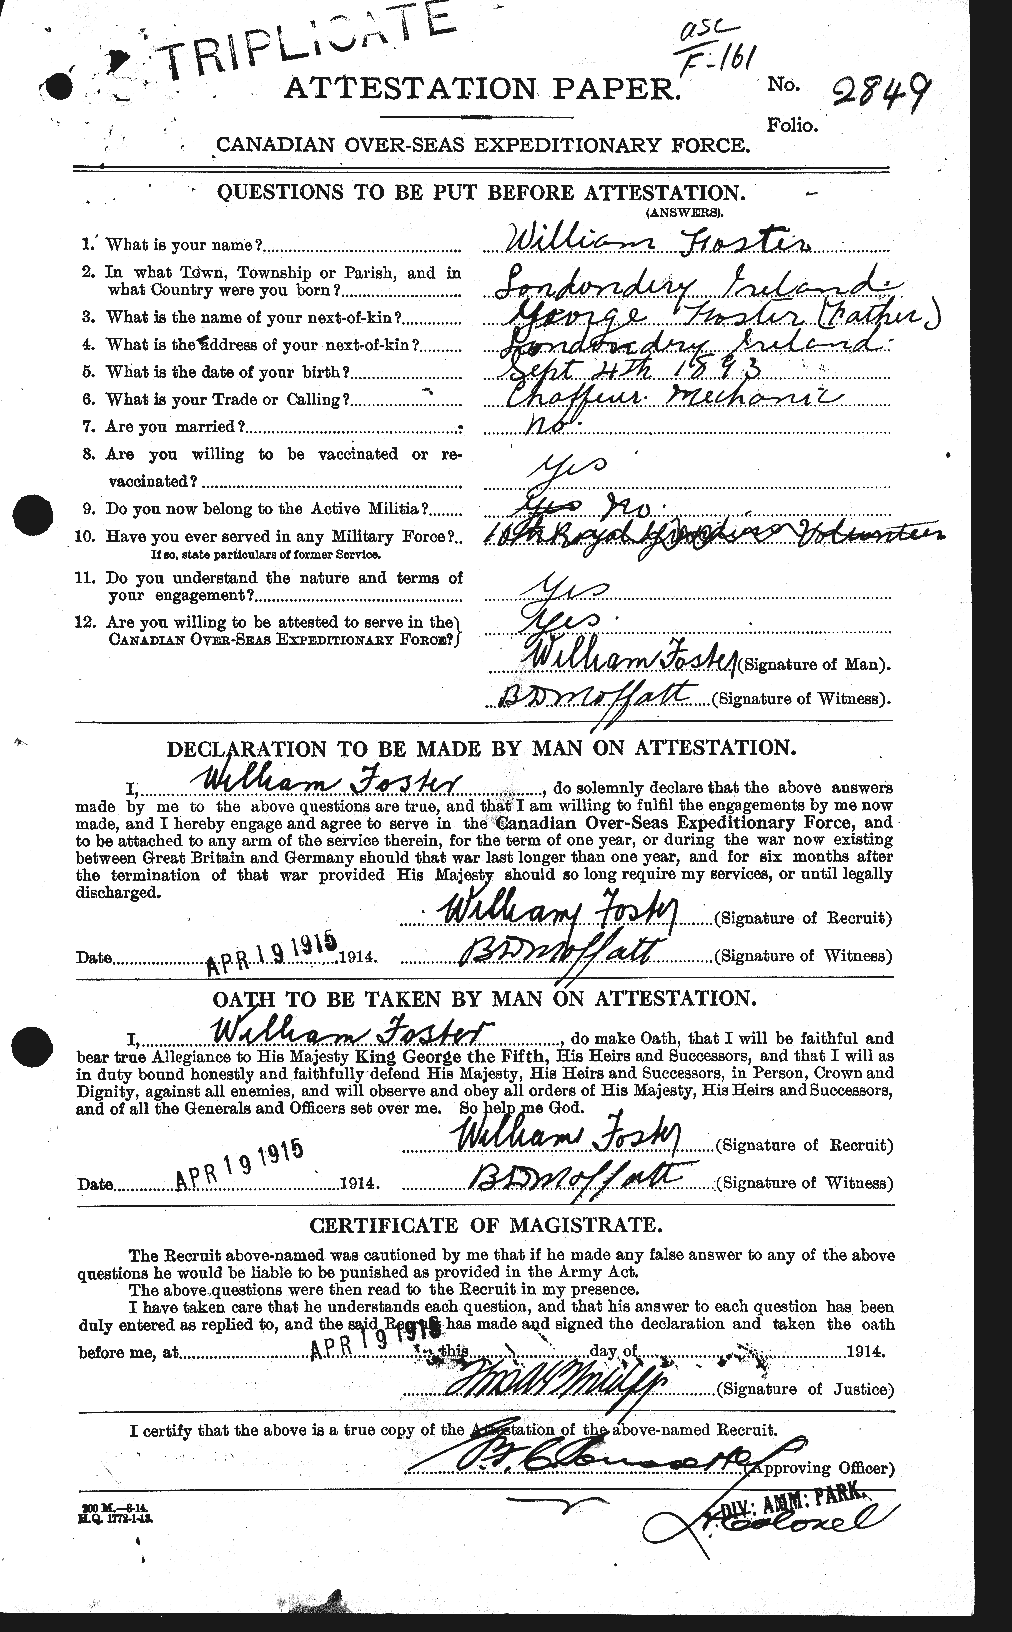 Personnel Records of the First World War - CEF 328721a